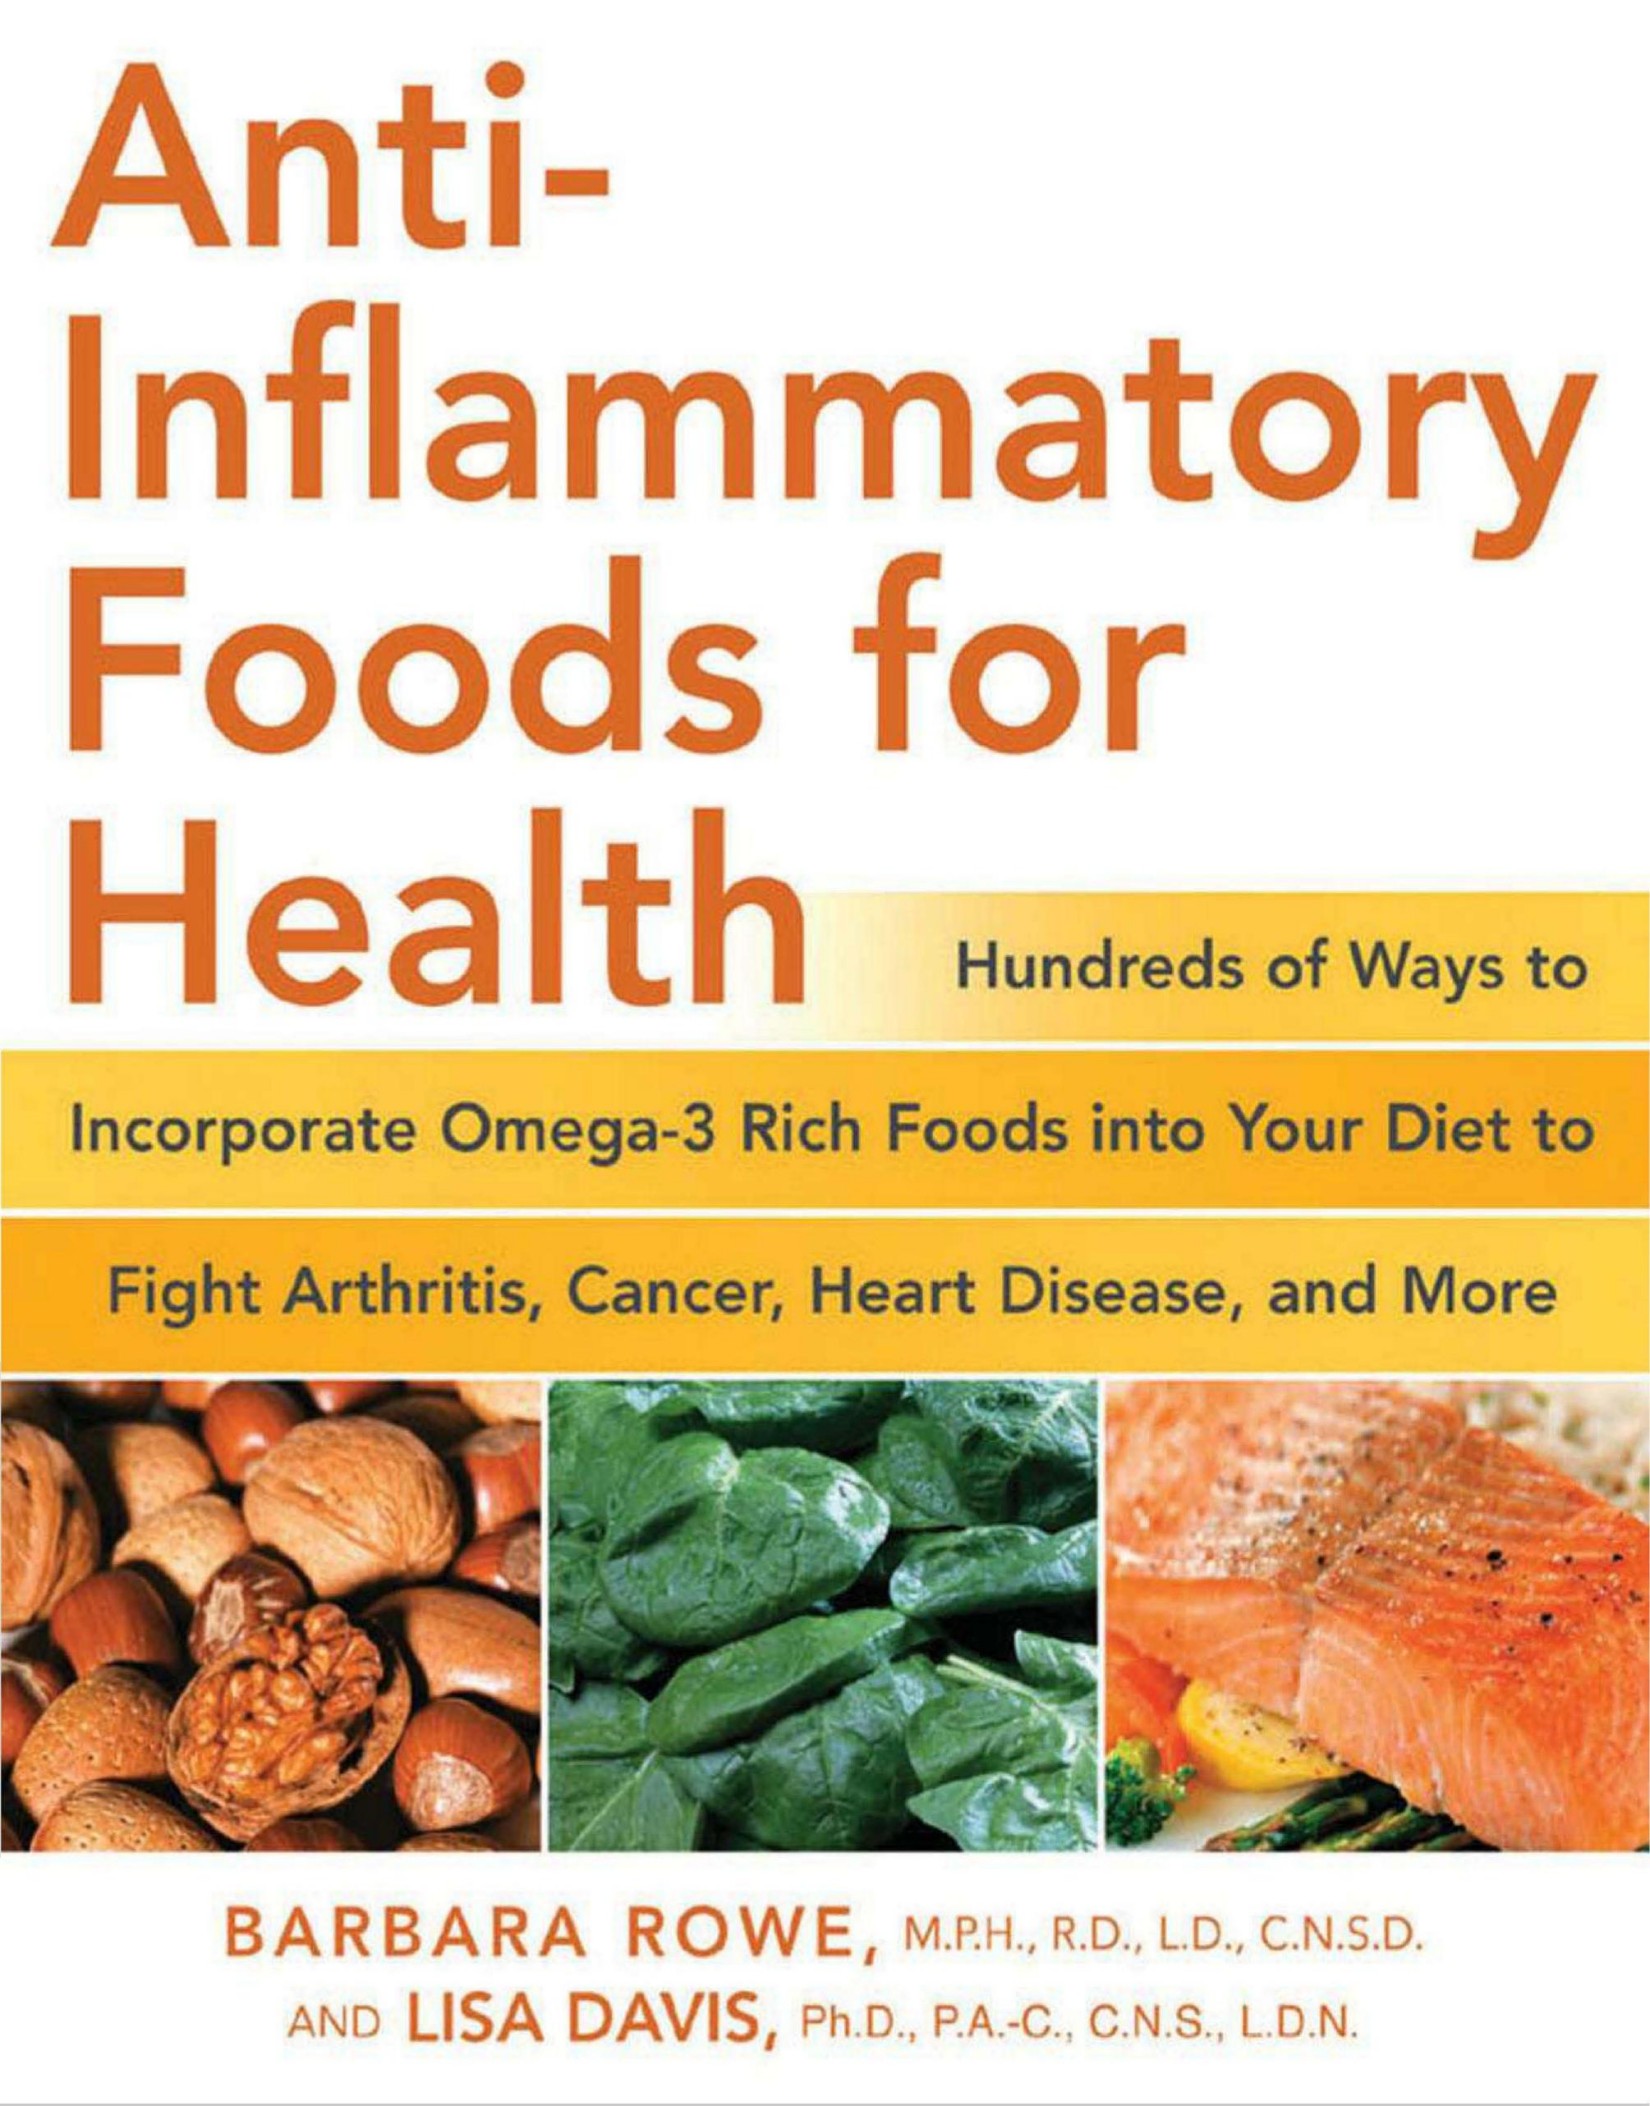 Anti Inflammatory Foods for Health  Hundreds of Ways to Incorporate Omega 3 Rich Foods into Your Diet to Fight Arthritis, Cancer, Heart Disease, and More 2008